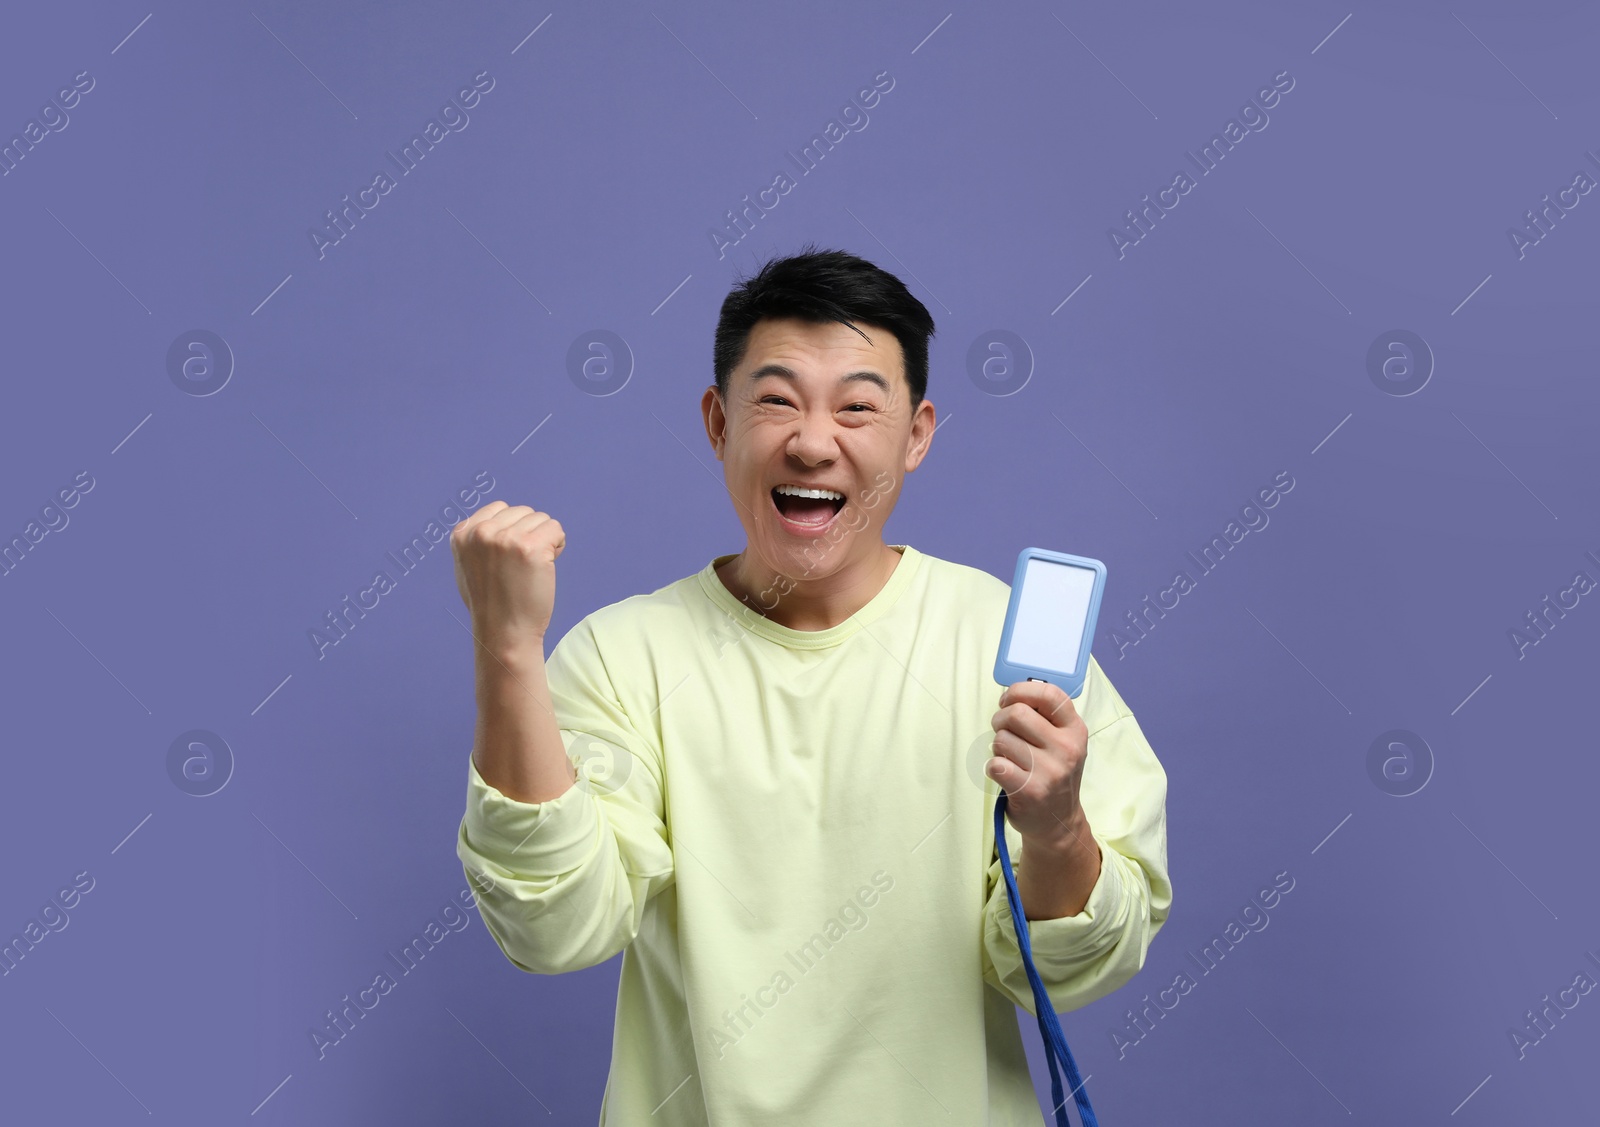 Photo of Emotional asian man with vip pass badge on purple background